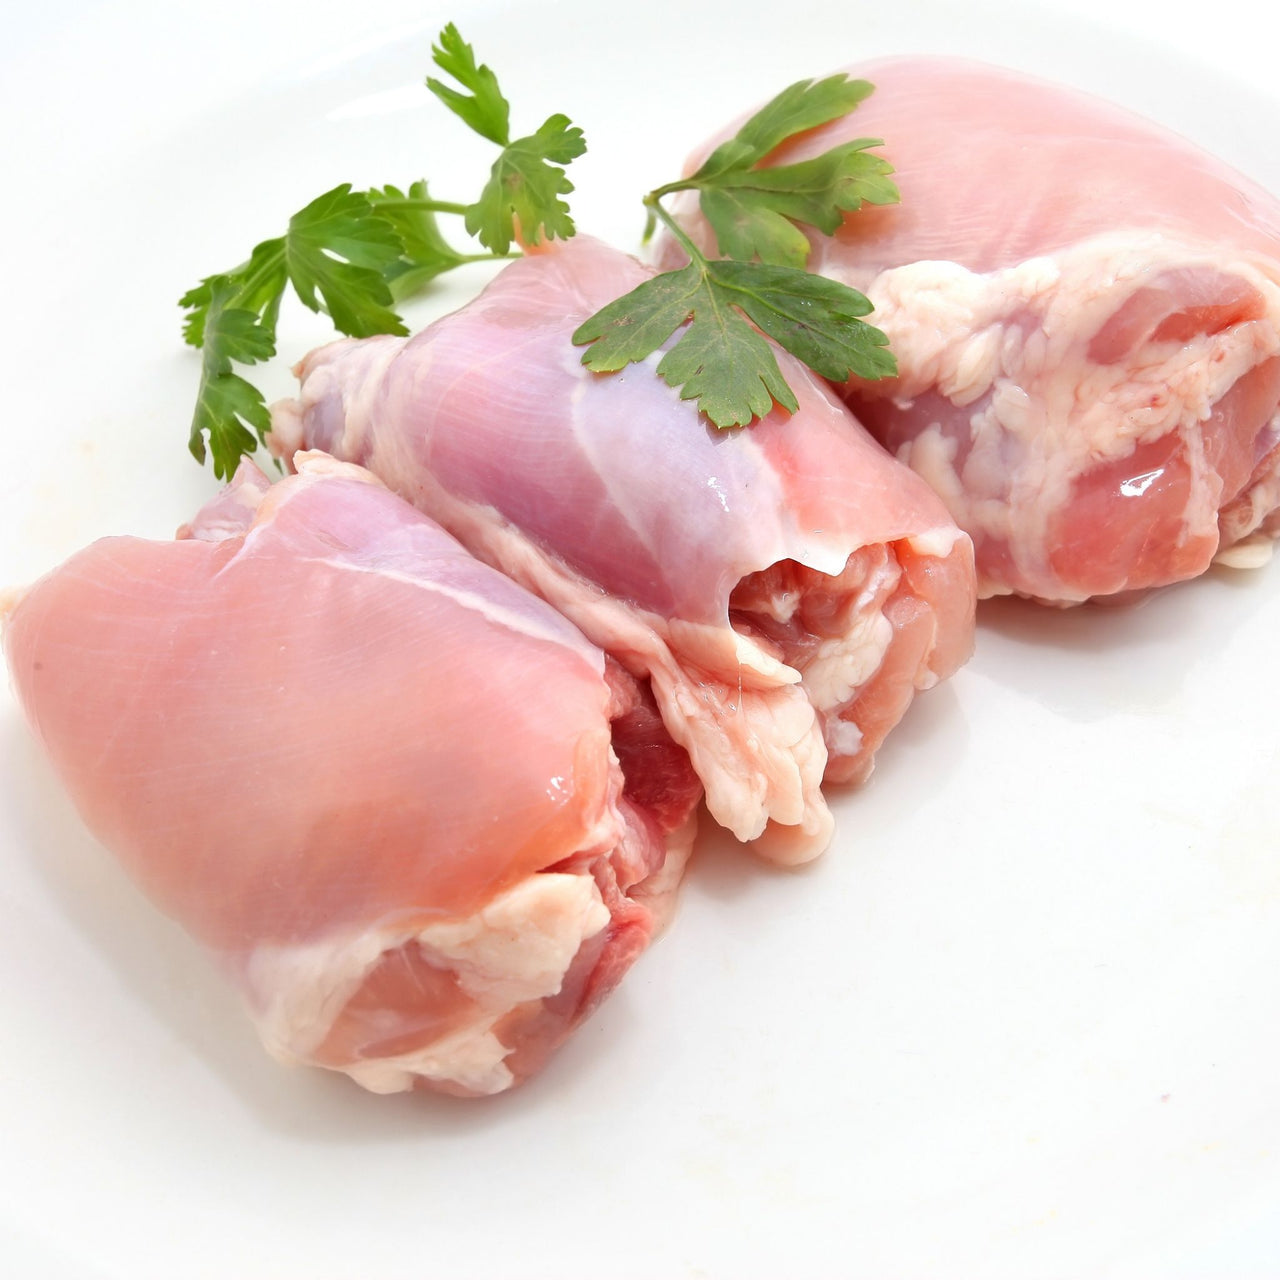 Image of F2F Signature Chicken Variety Pack 8.1kg avg.